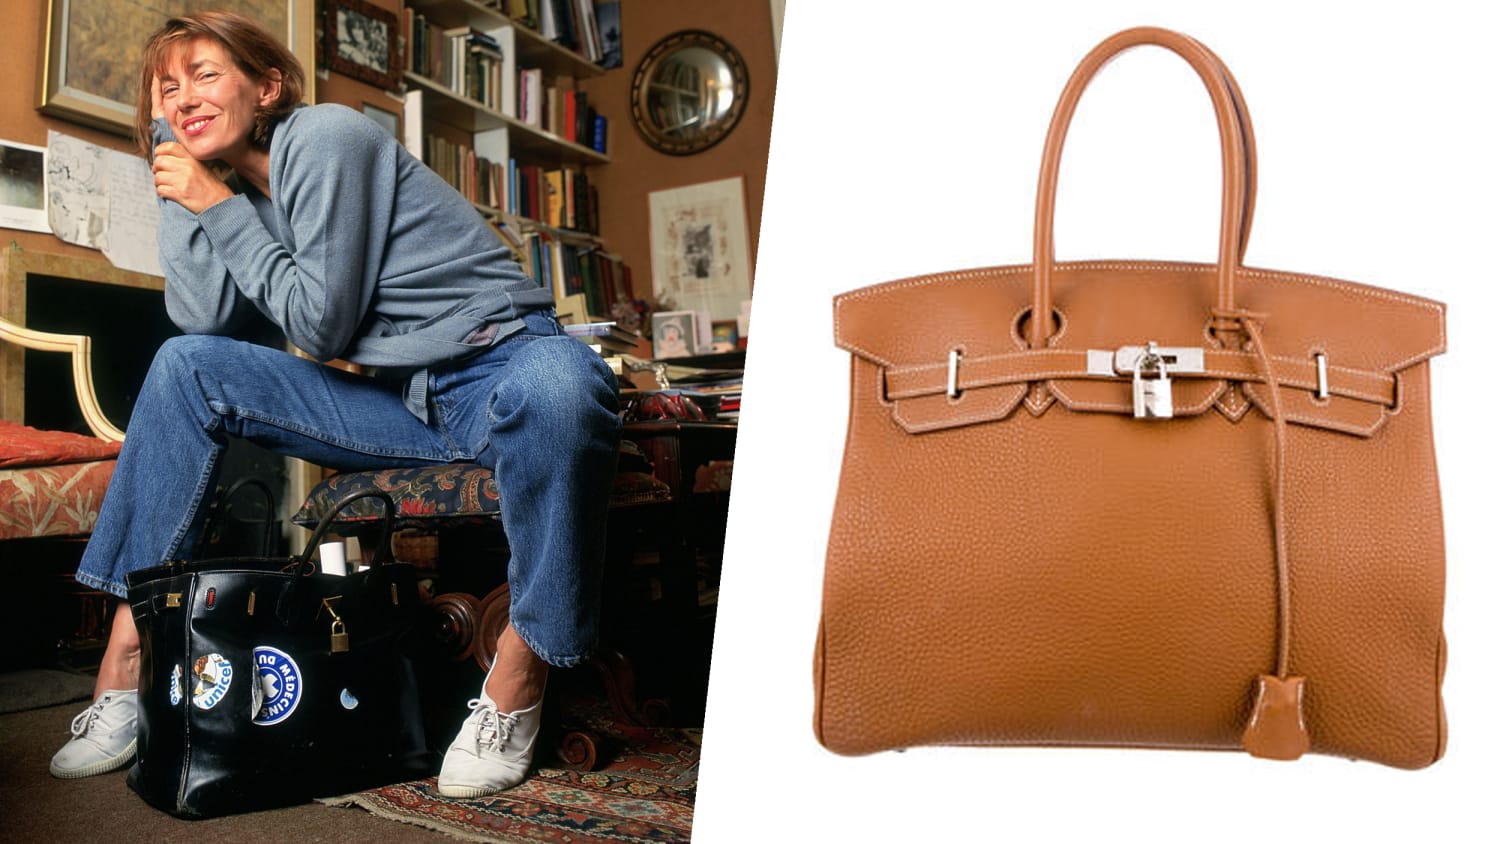 Hermes: Handbags with a Distinguished History